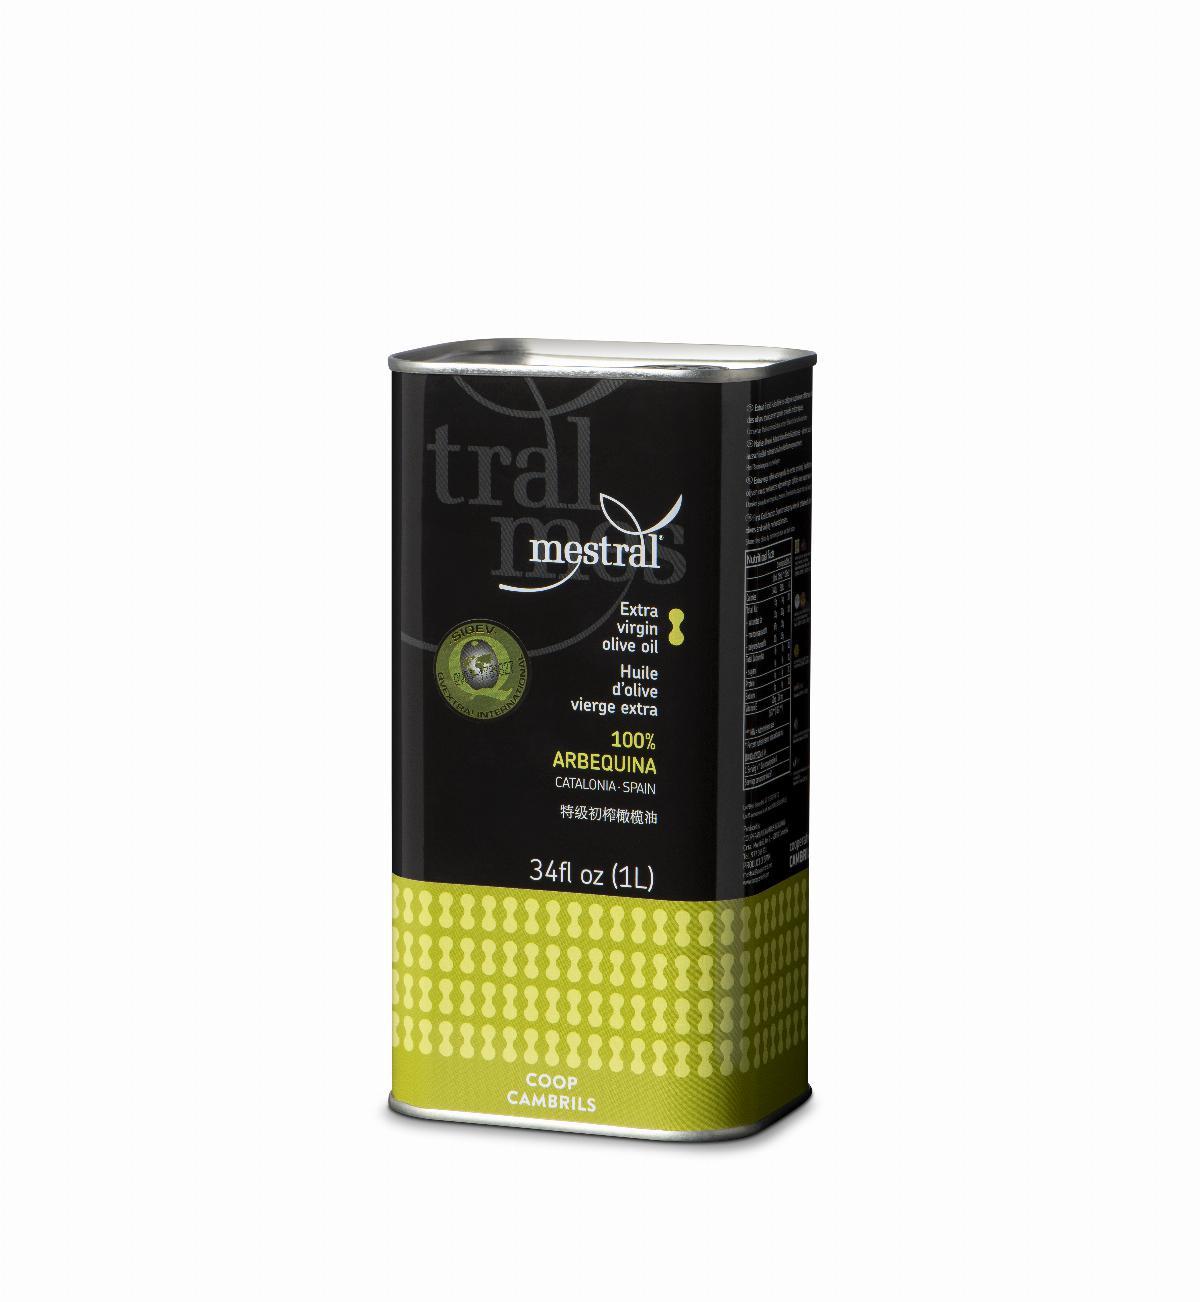 Huile d'Olive Vierge Extra Mestral Boite 1L 100% Arbequina